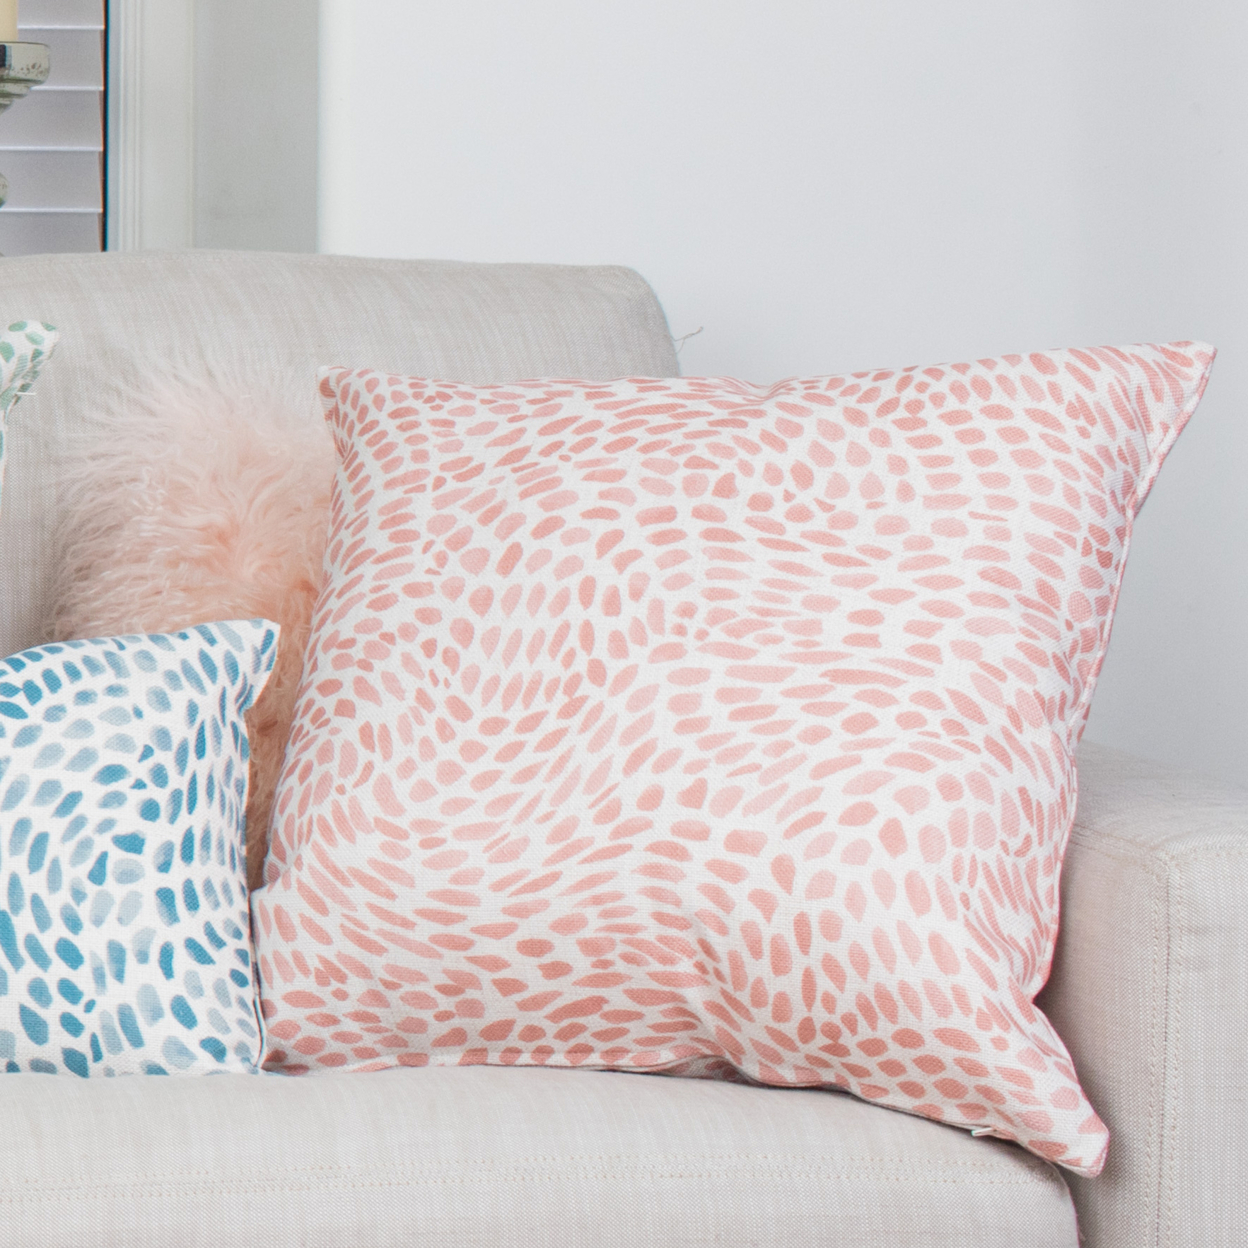 Matisse Dots Coral Pink Throw Pillow 19x19 Inches Square, Complete Pillow With Polyfill Pillow Insert